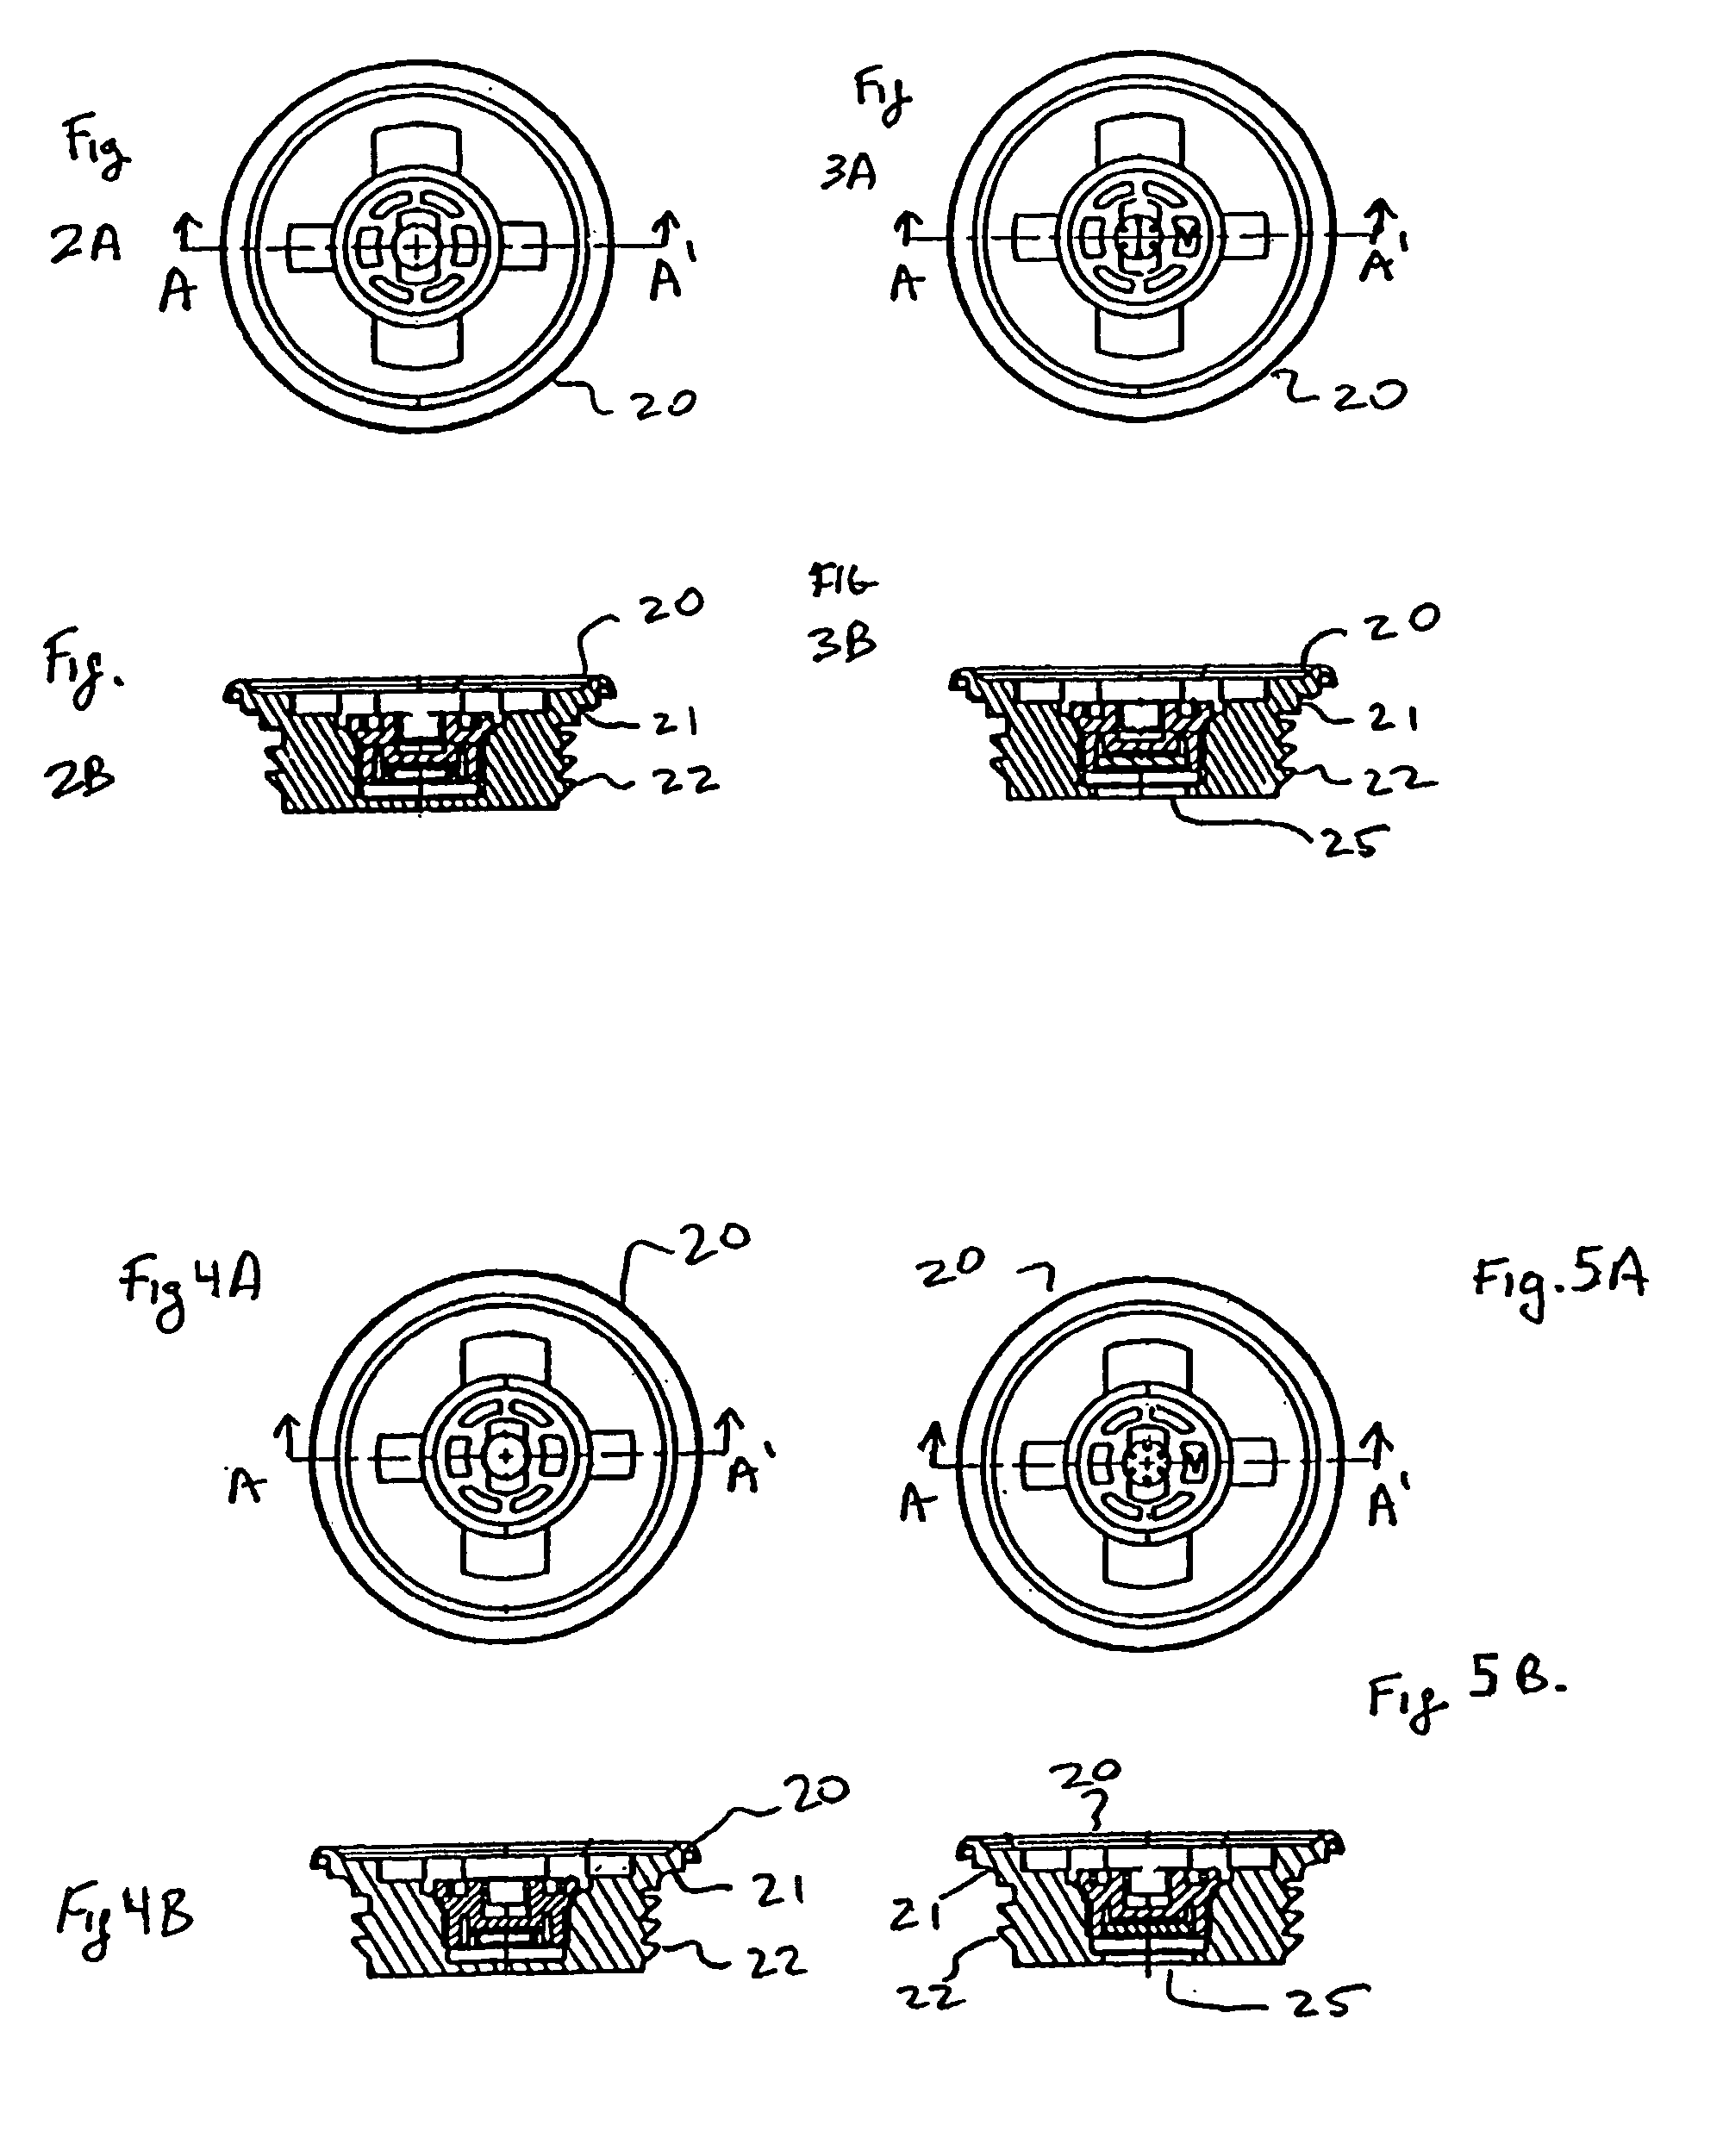 Sealing system for ports of vessels used for corrosive fluids